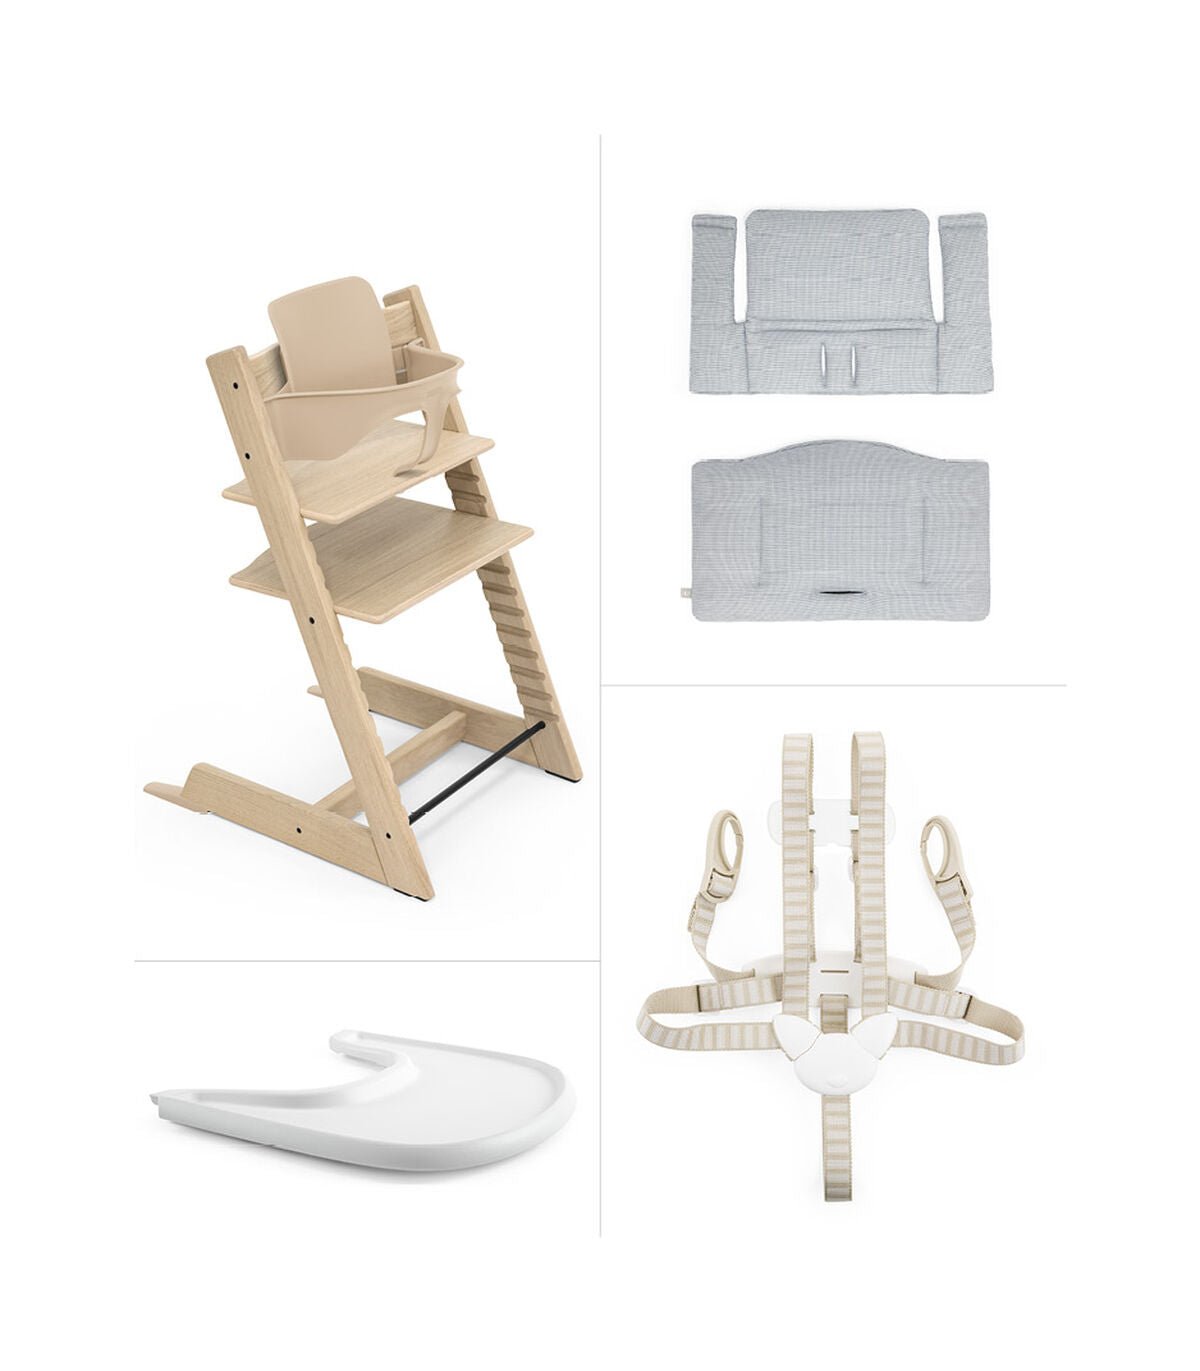 Stokke Tripp Trapp High Chair Complete With Cushion And Tray - ANB Baby -7040356390007$300 - $500